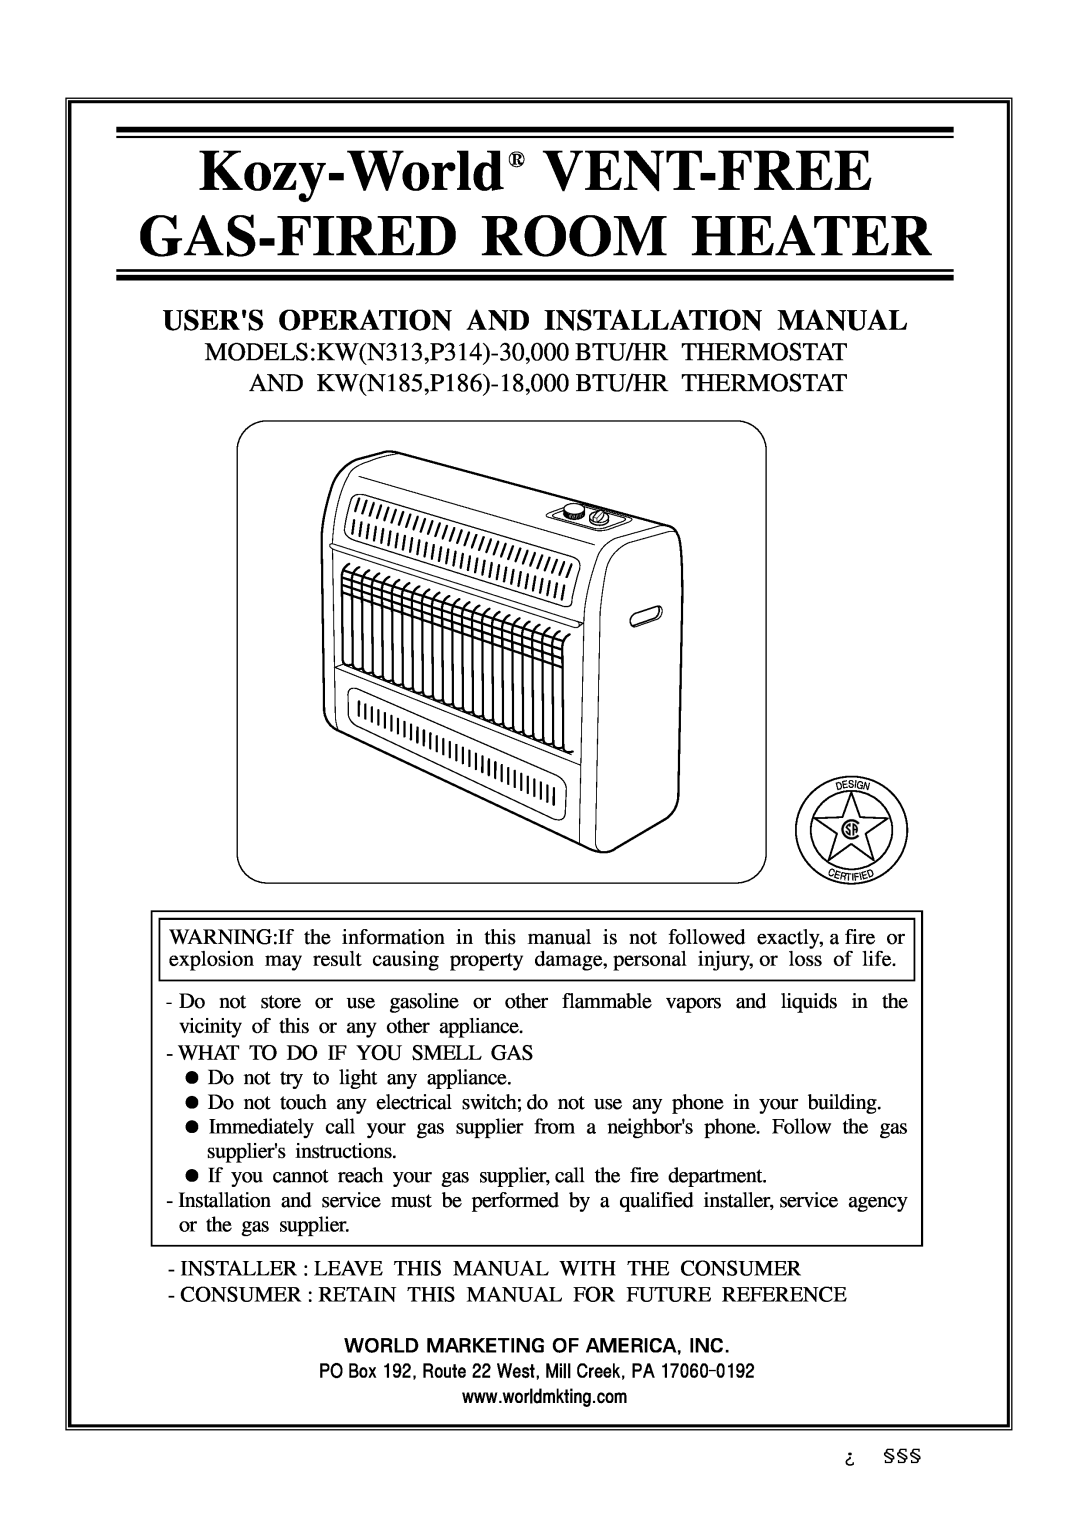 DreamGEAR P314 installation manual Kozy-World VENT-FREE GAS-FIREDROOM HEATER, Users Operation And Installation Manual 